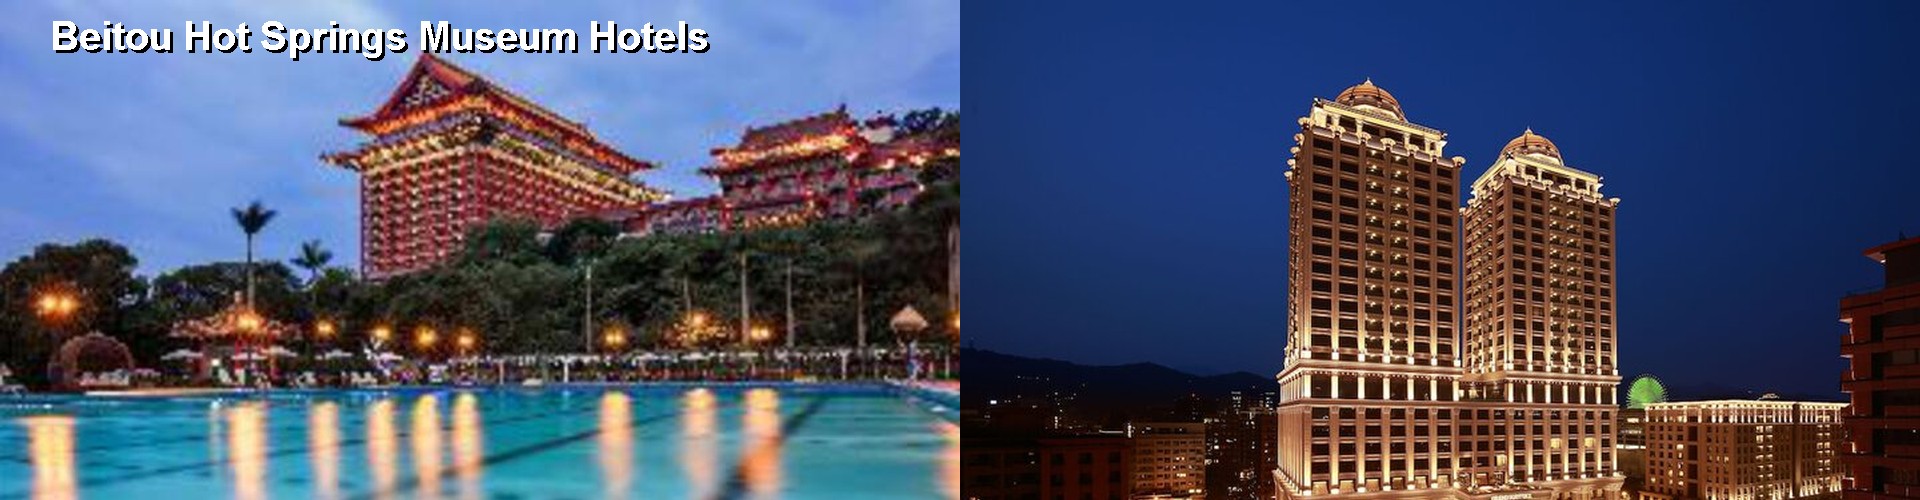 5 Best Hotels near Beitou Hot Springs Museum